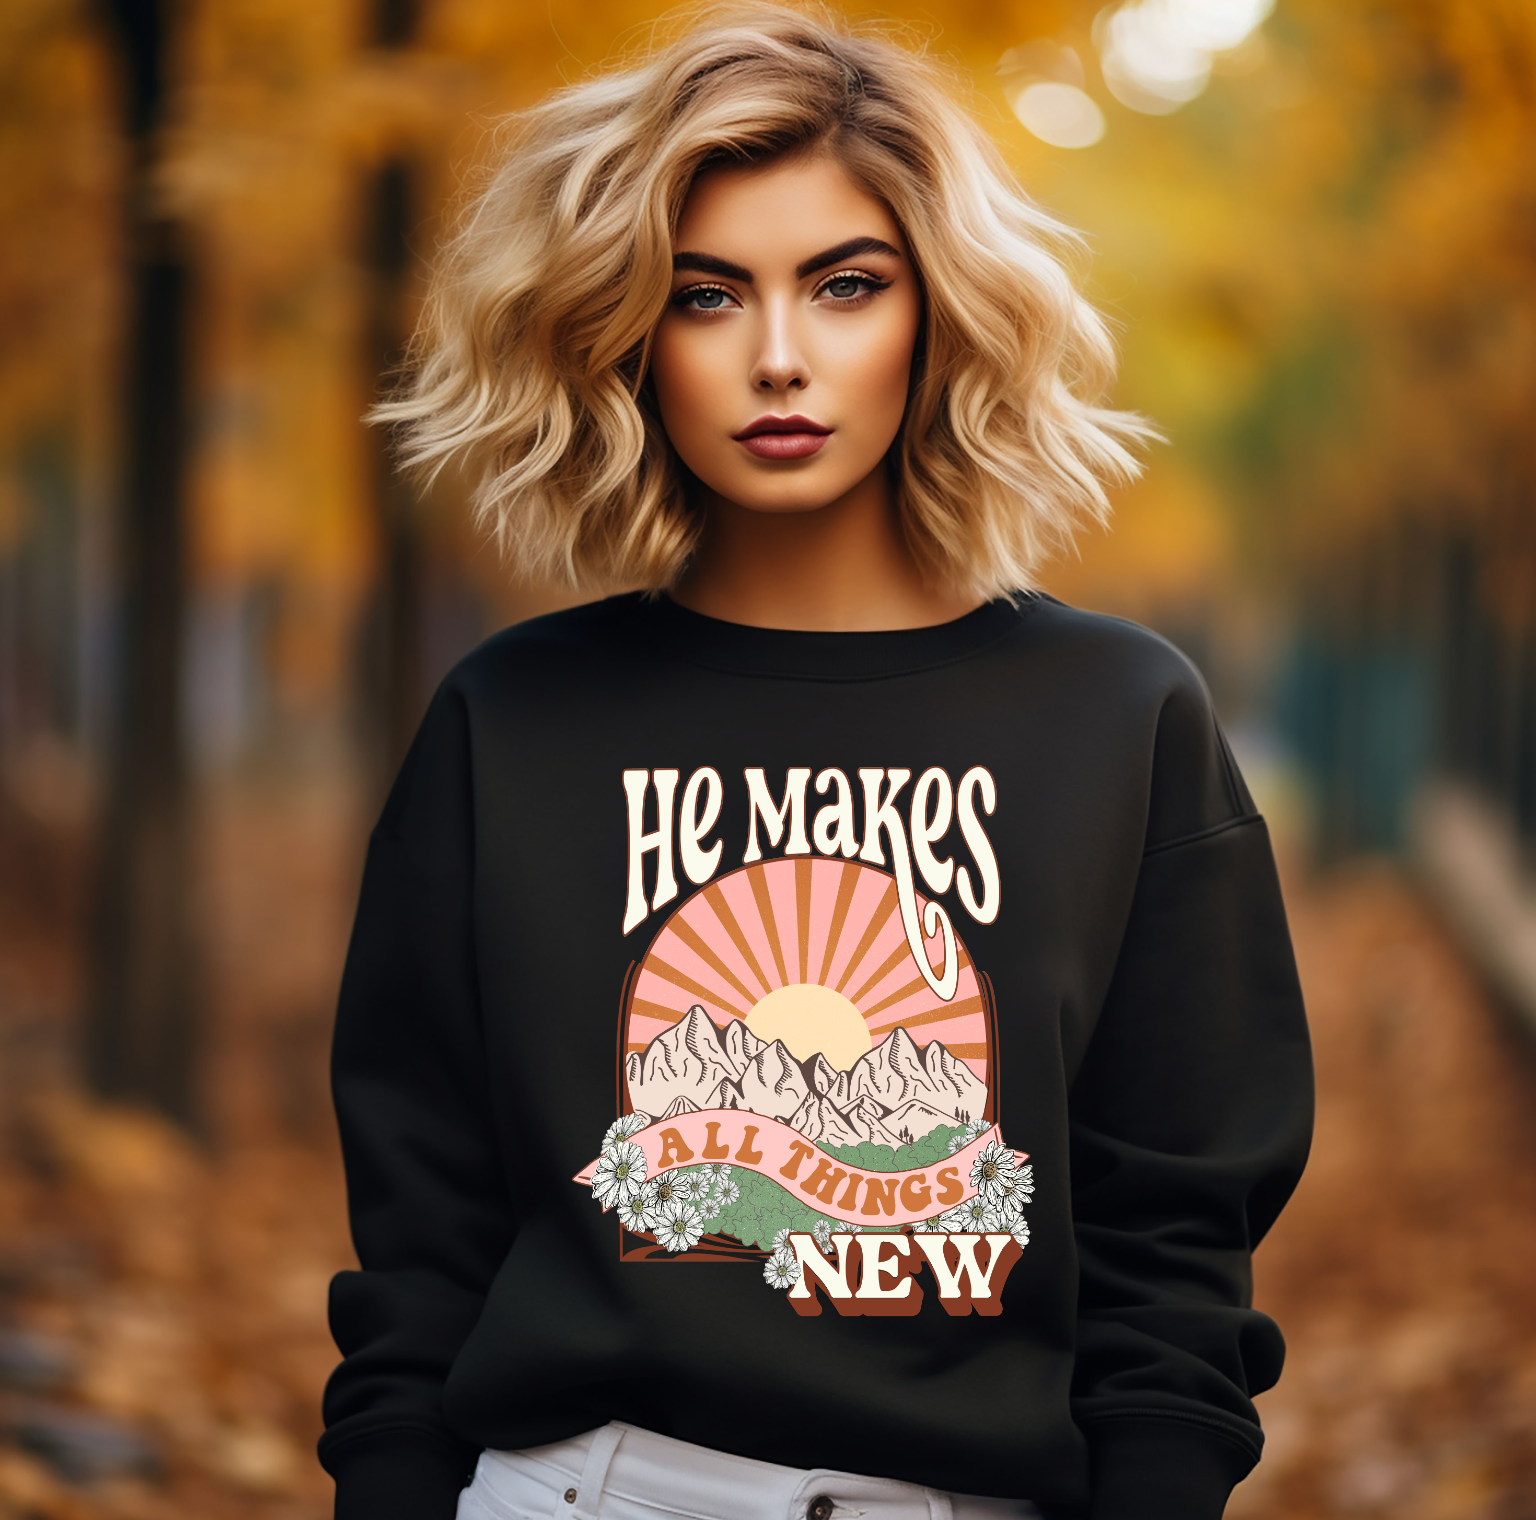 He Makes All Things New Crewneck - Black